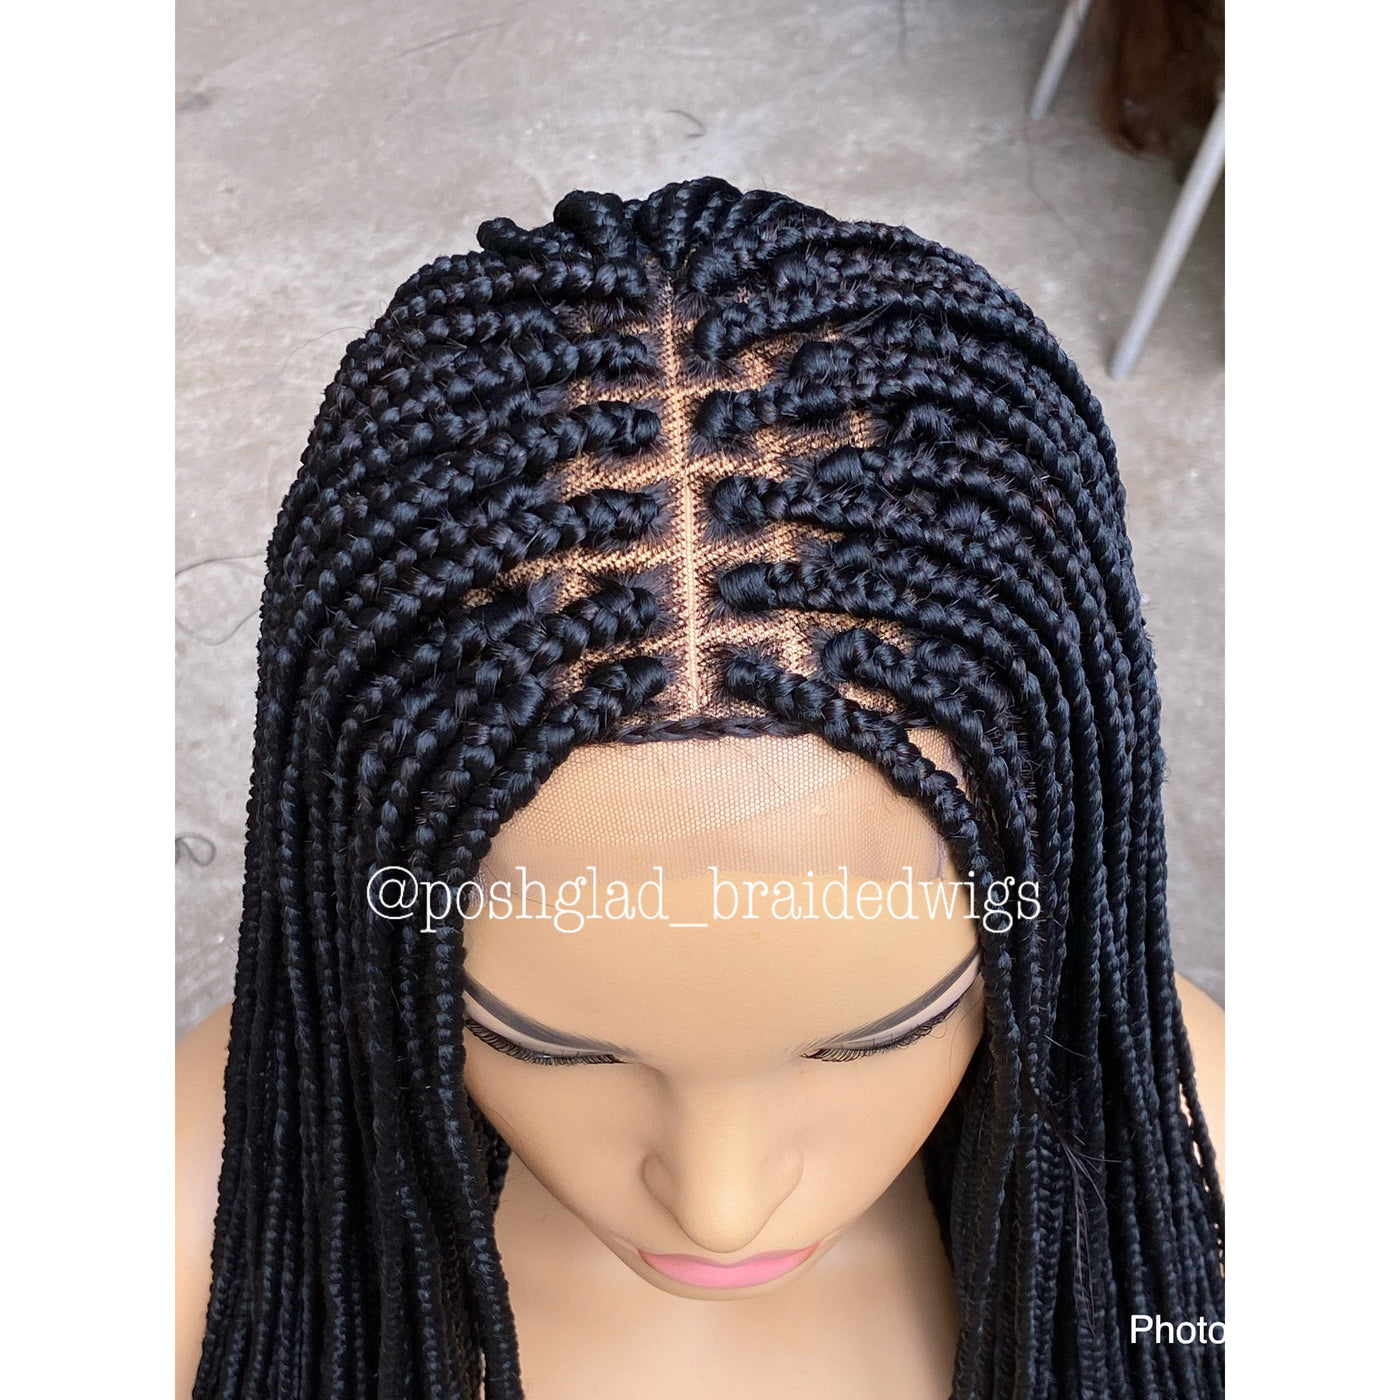 Lace Closure Braided Wigs Collection Image - https://poshglad.com/collections/laceclosurebraidedwigs